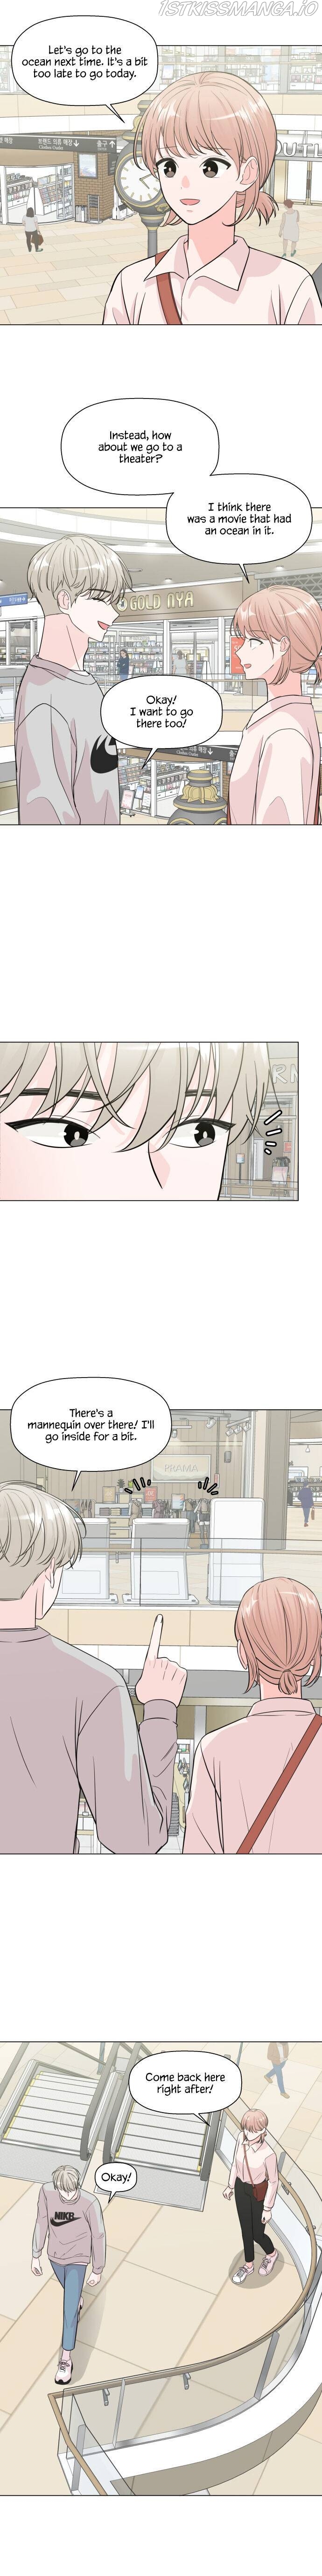 My Roommate is a Mannequin! Chapter 8 - Page 9